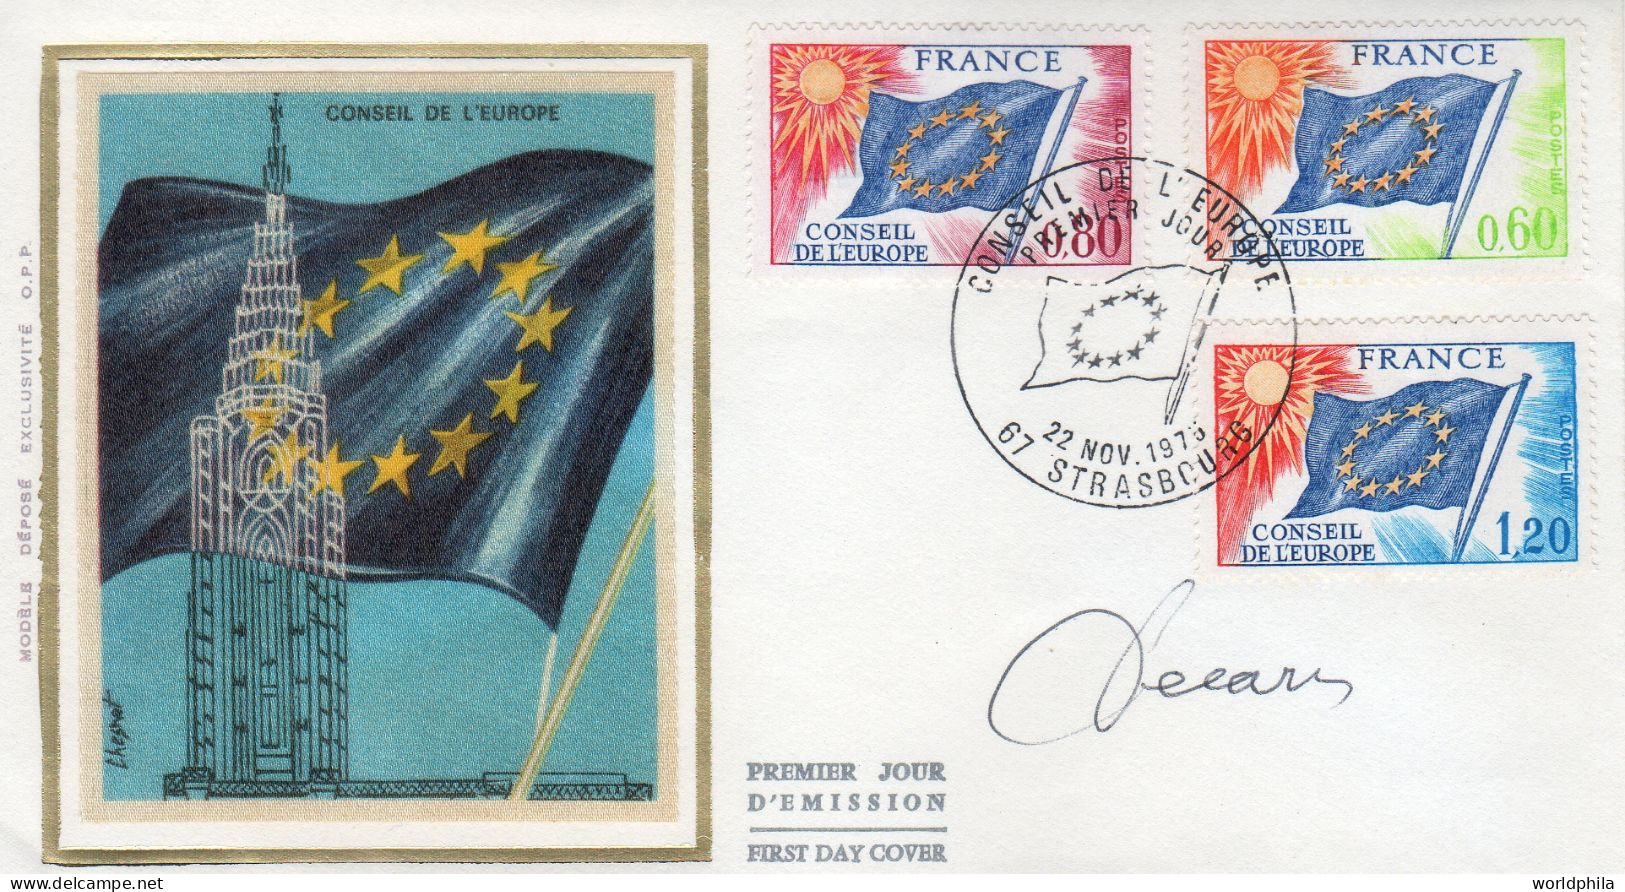 France 1975 FDC Autographed, Drawn And Engraved By Albert Decaris "Conseil De L'Europe" - Covers